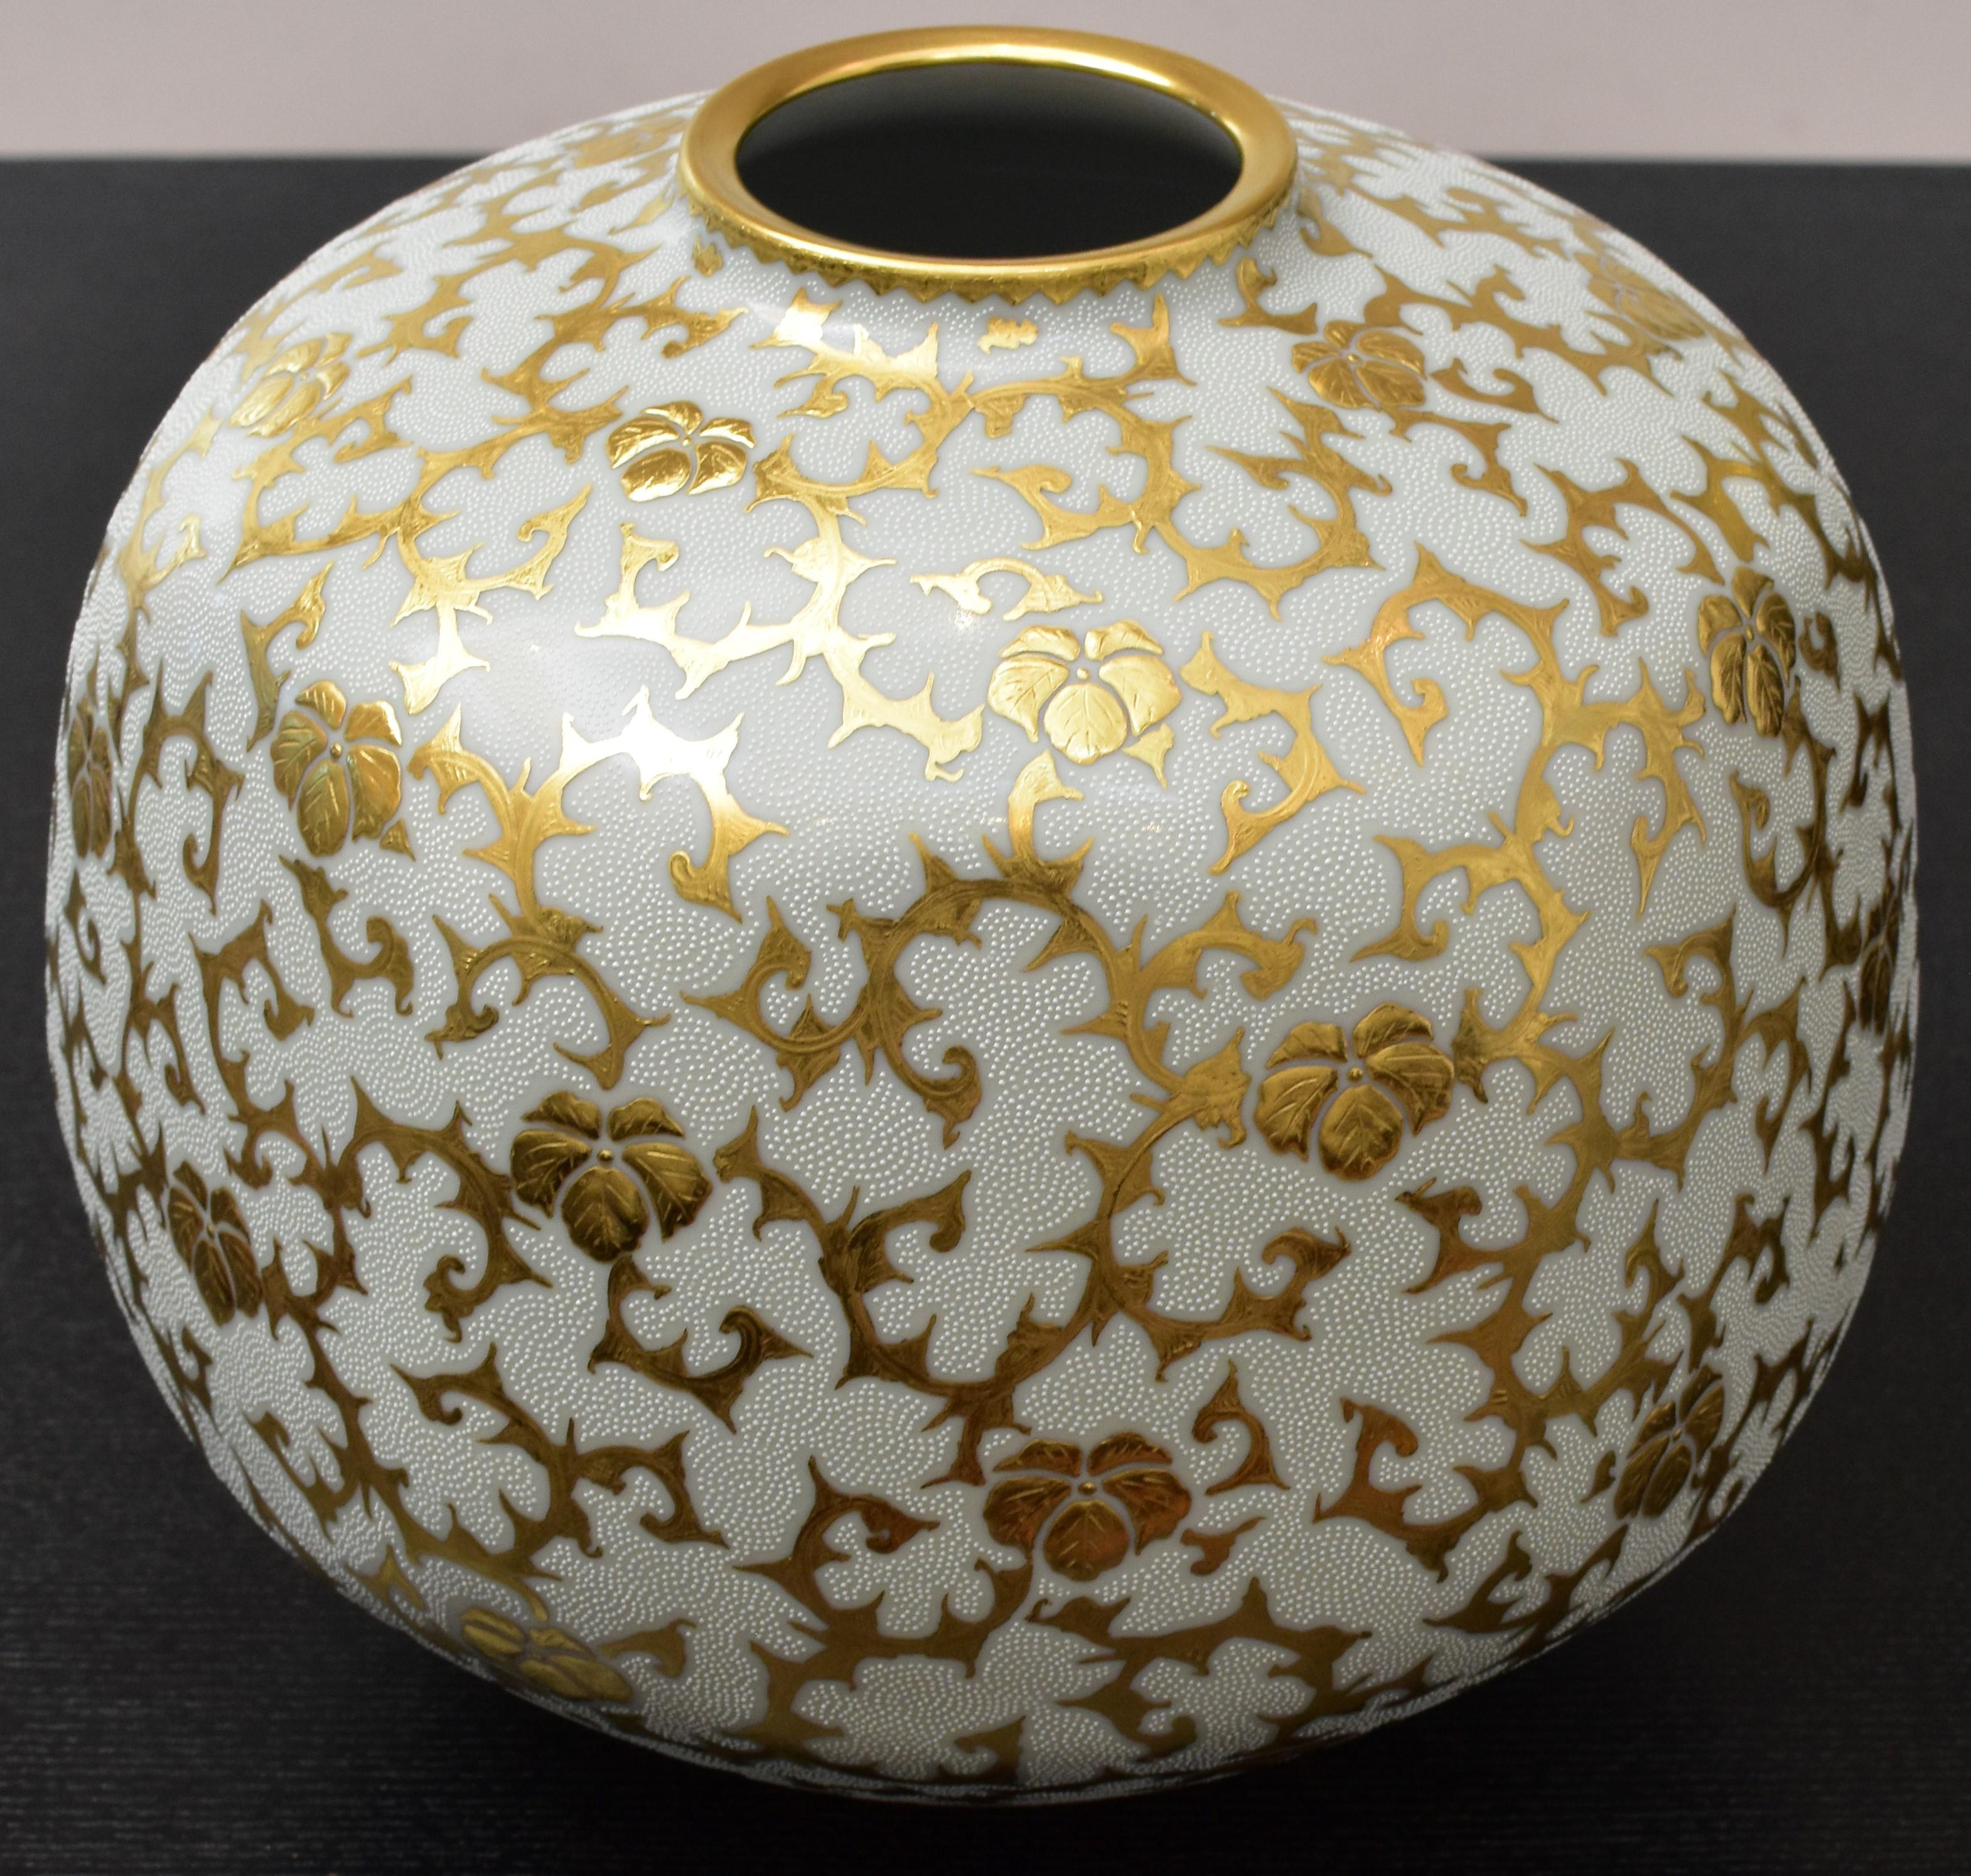 Exceptional contemporary Japanese Kutani porcelain vase, extremely intricately hand painted with unique raised 